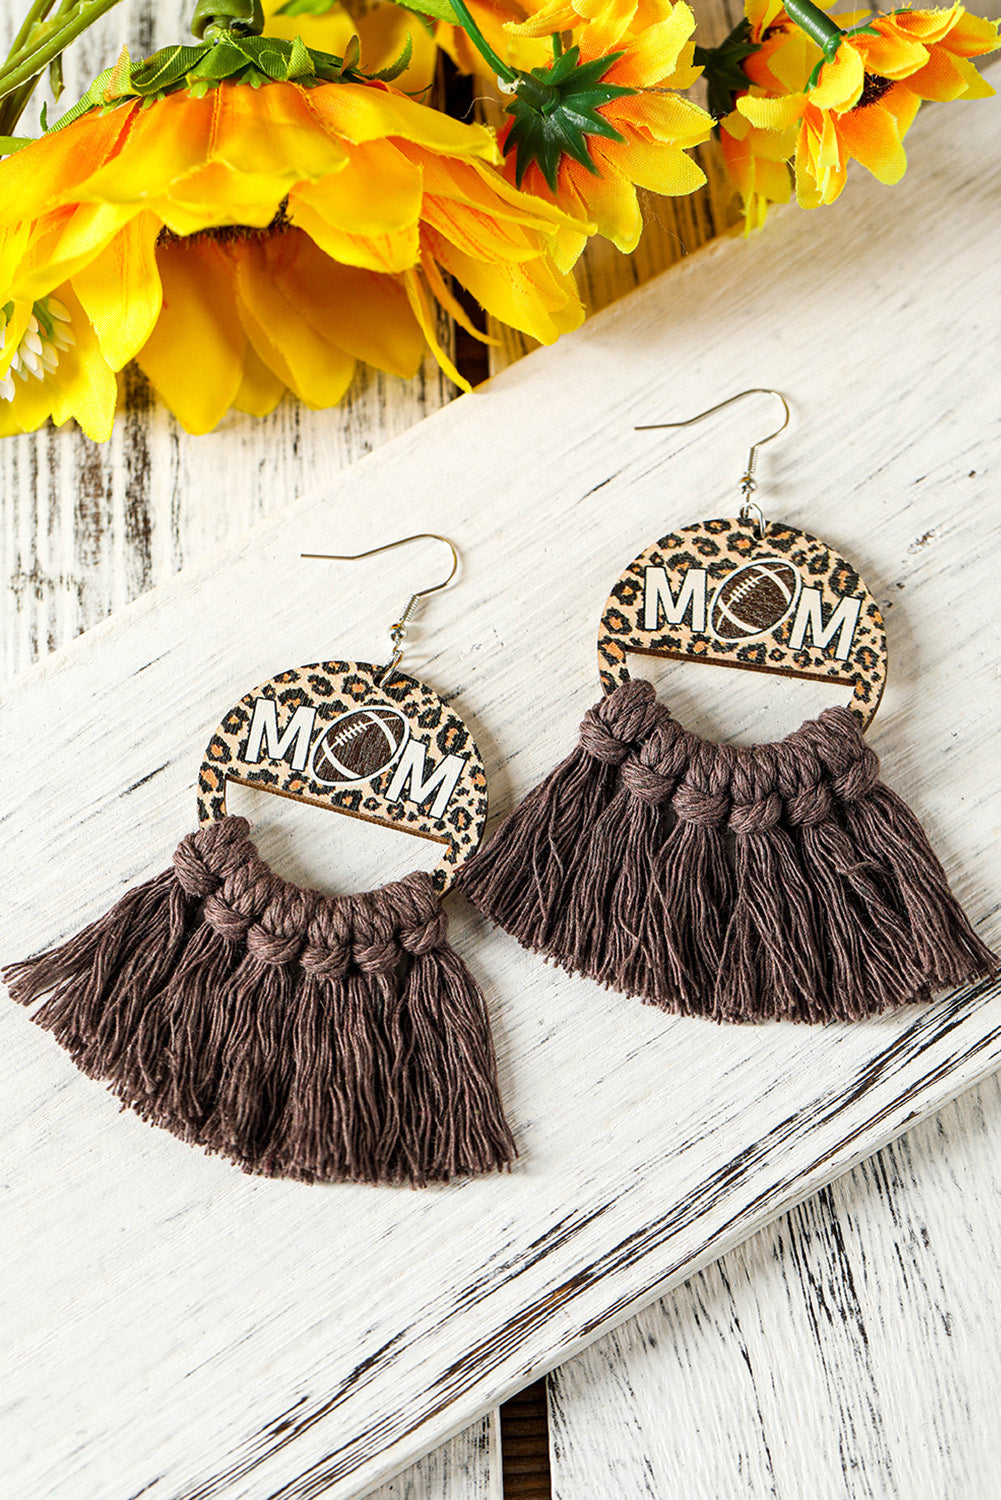 Chestnut Leopard Rugby MOM Print Fringed Hook Earrings Jewelry JT's Designer Fashion